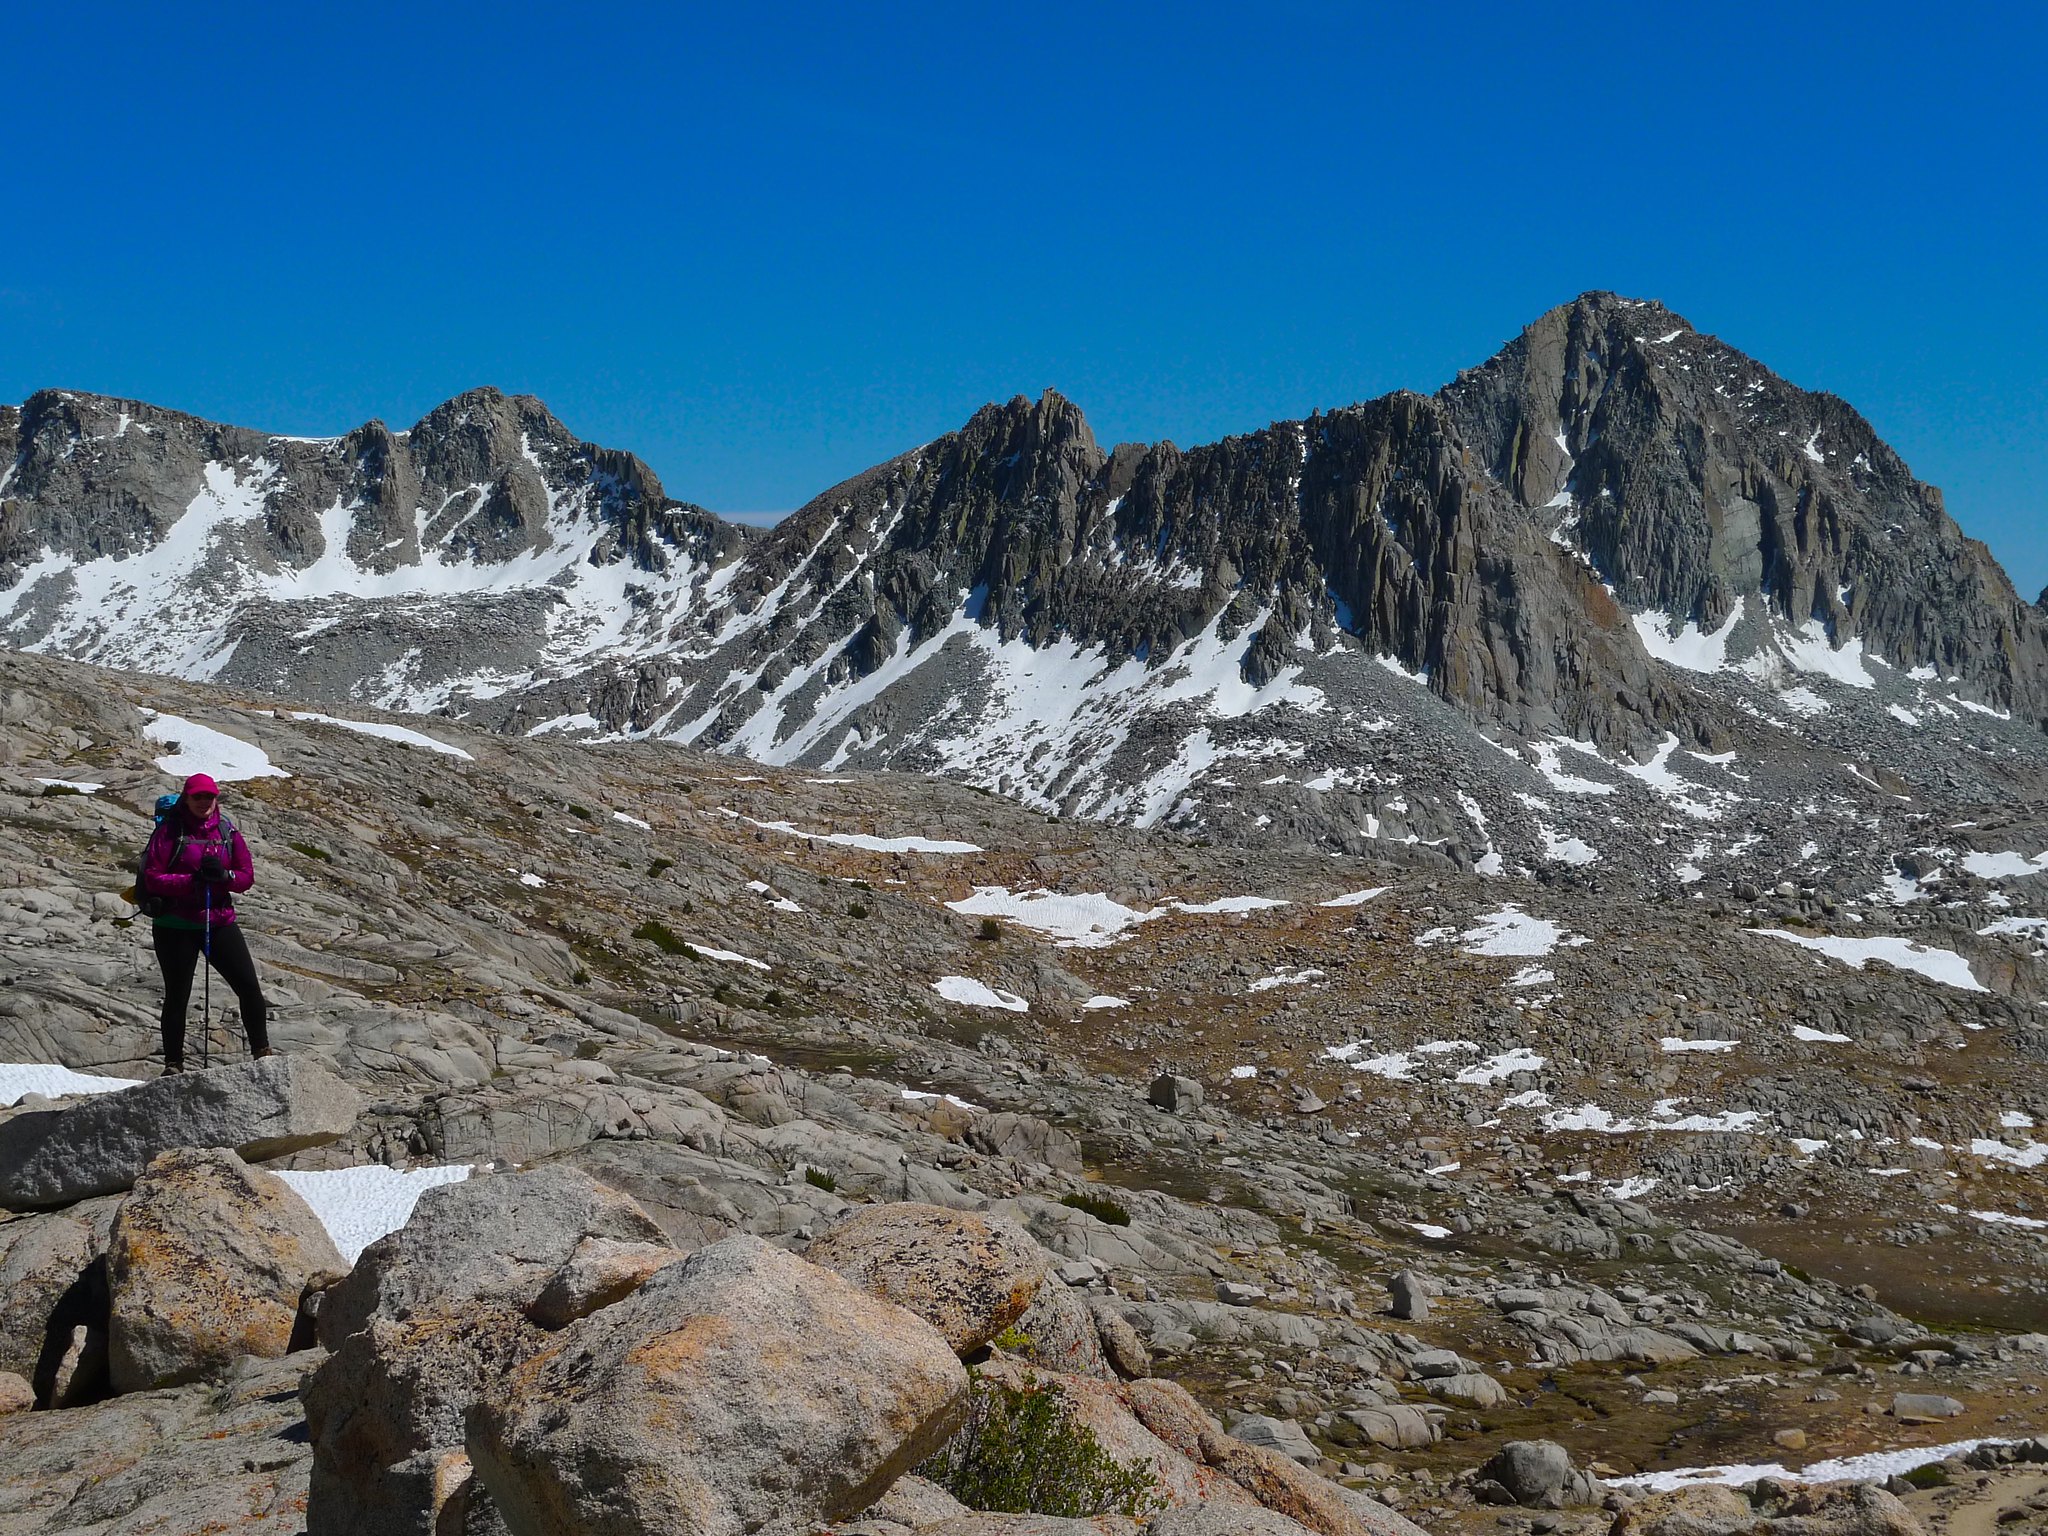 A JMT hiker on a resuppuly was kind enough to take my picture!